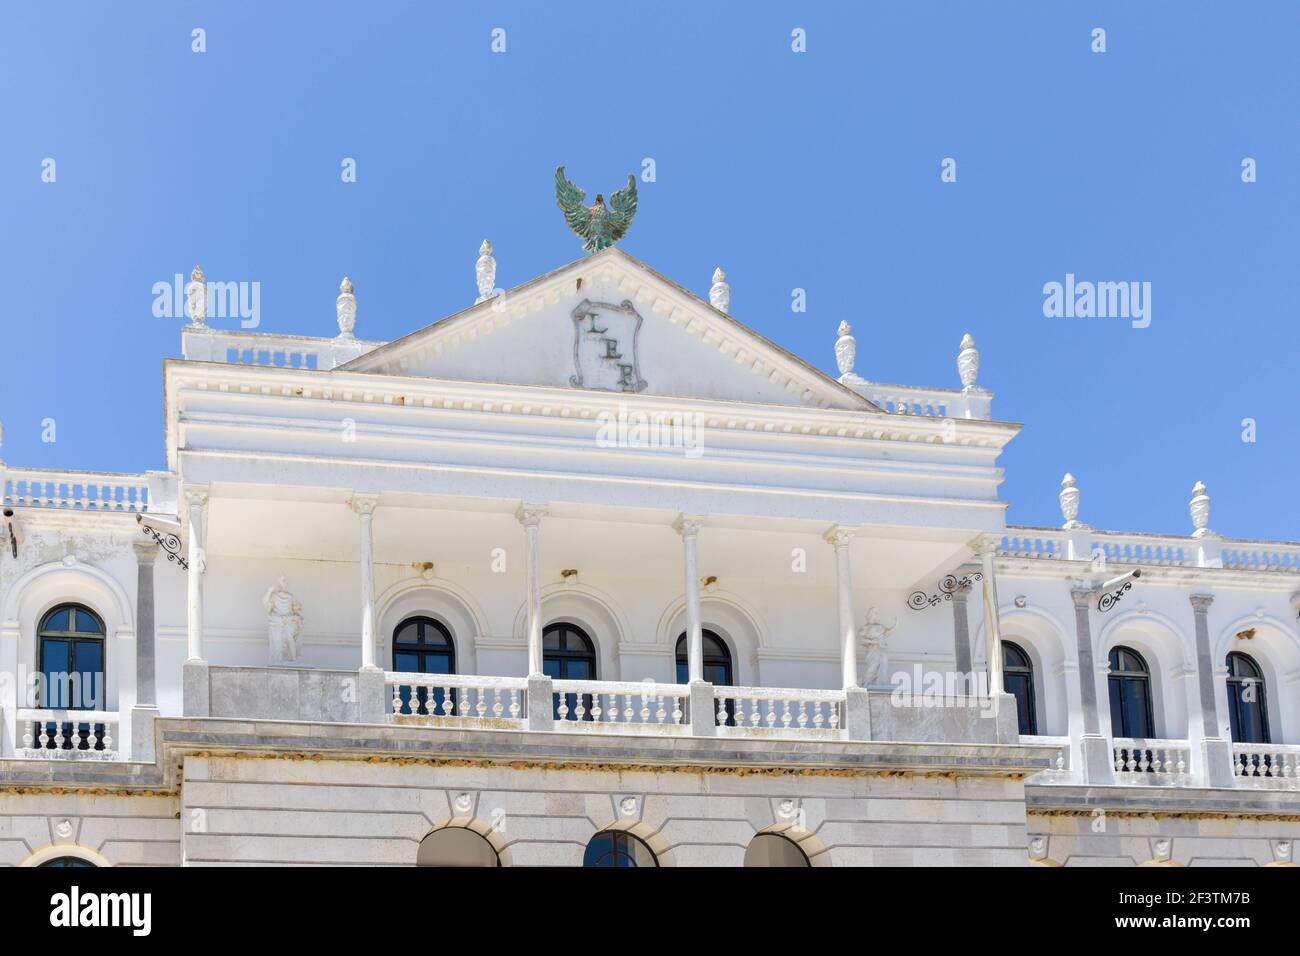 The Acebron Palace in Donana National Park in Huelva, Andalusia, Spain. Stock Photo